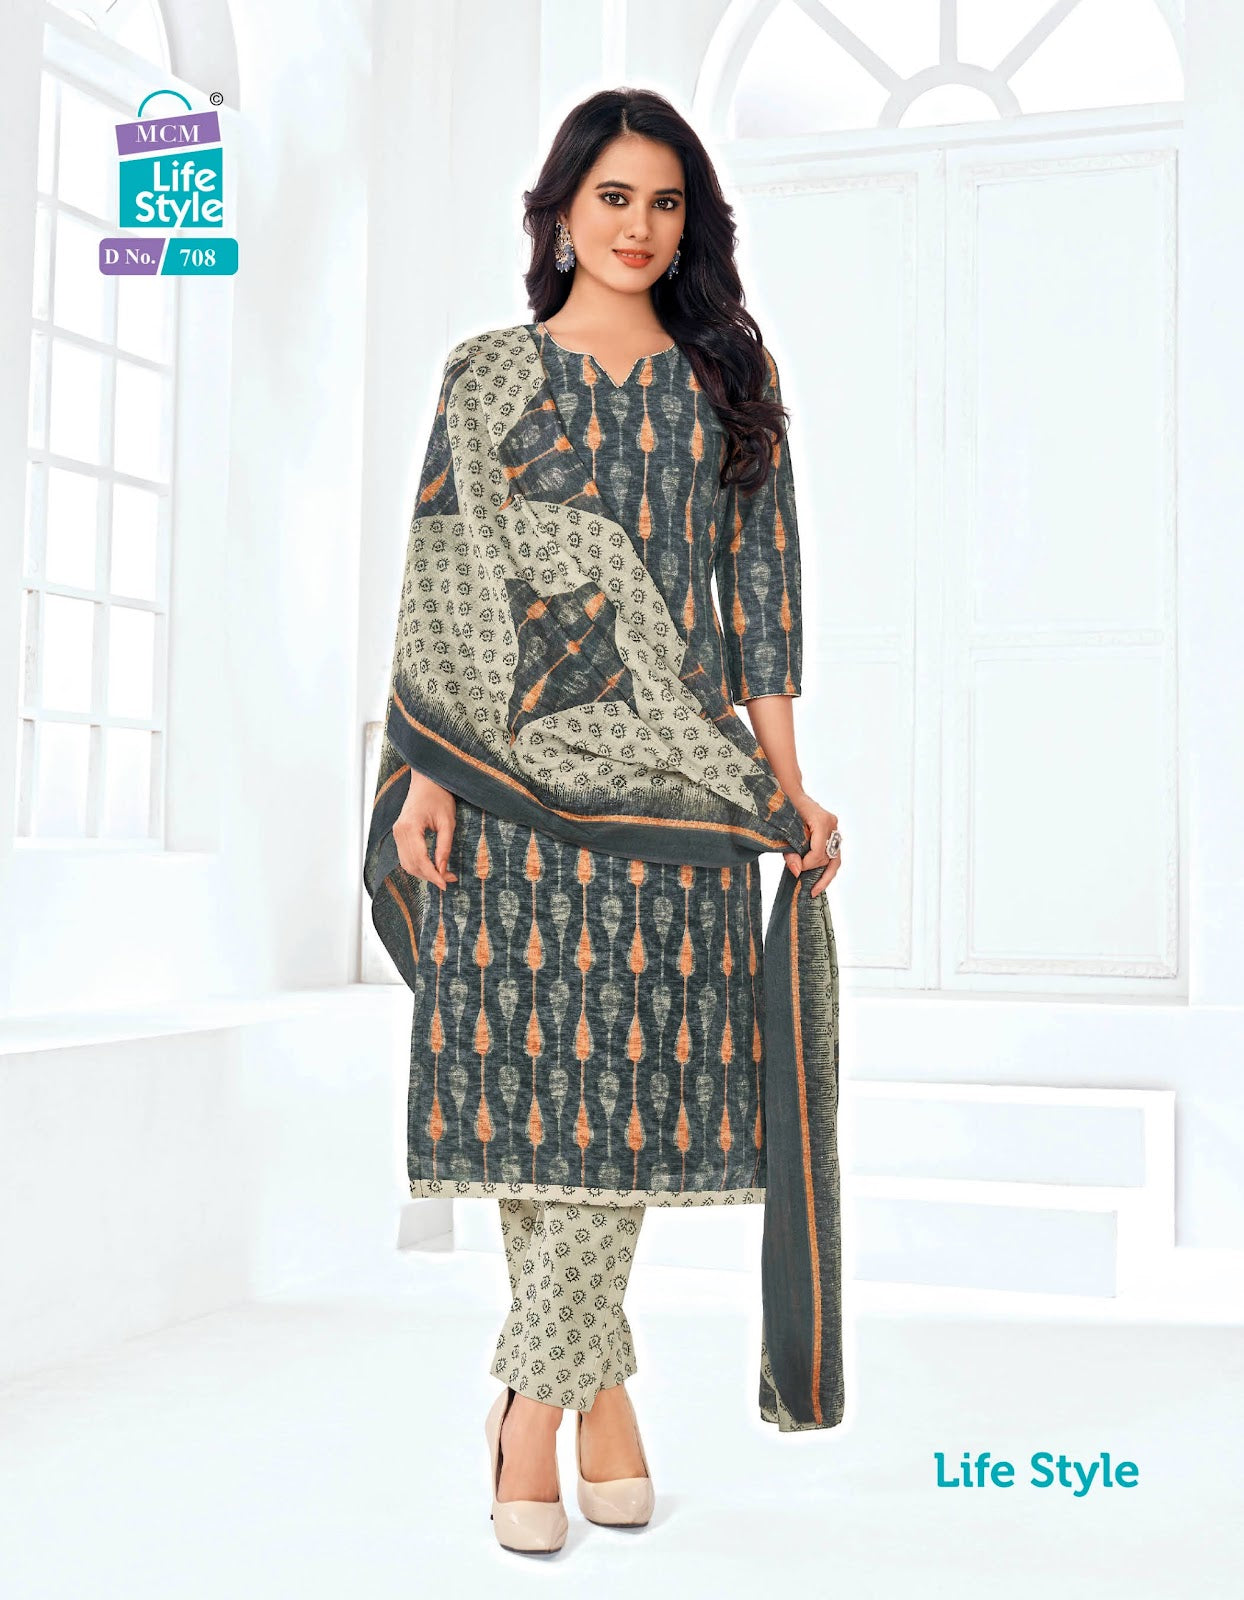 Vol 7 Mcm Lifestyle Cotton Readymade Pant Style Suits